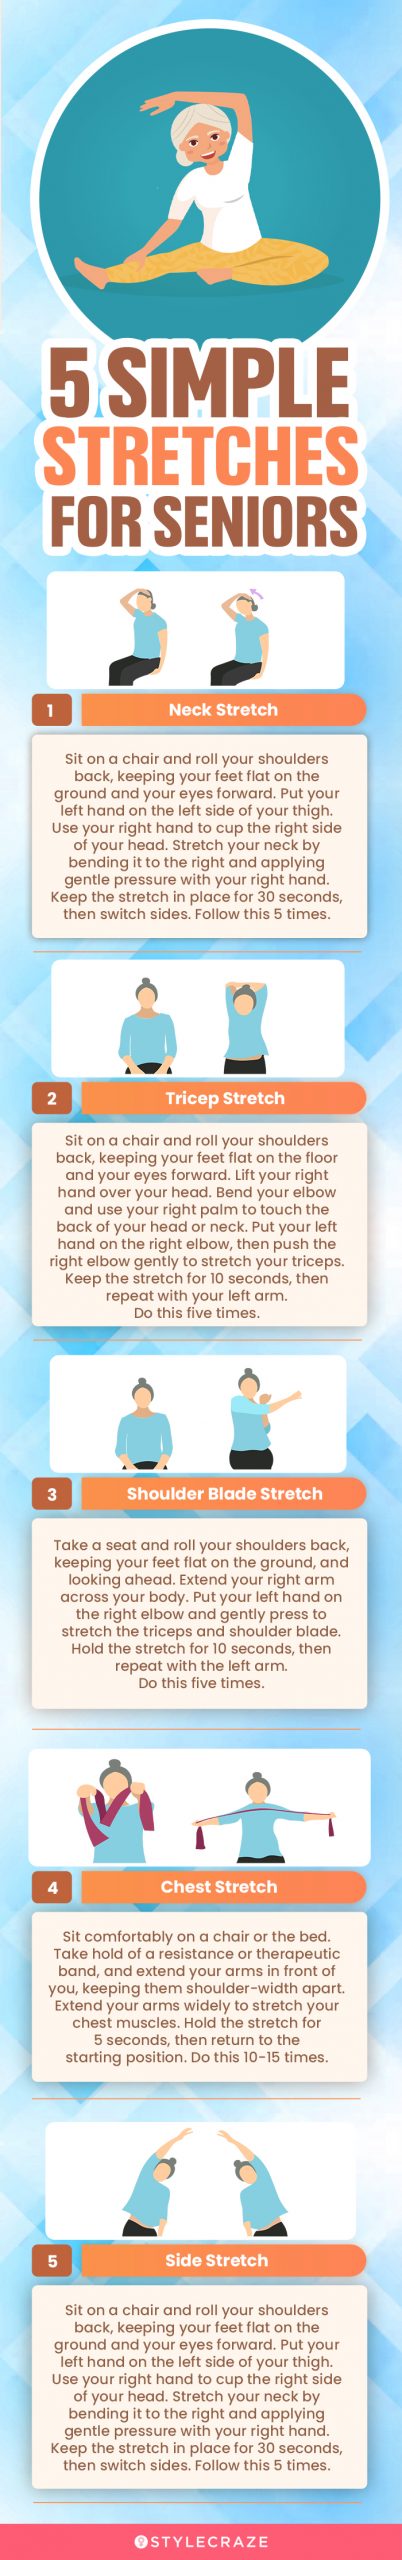 5 simple stretches for seniors (infographic)